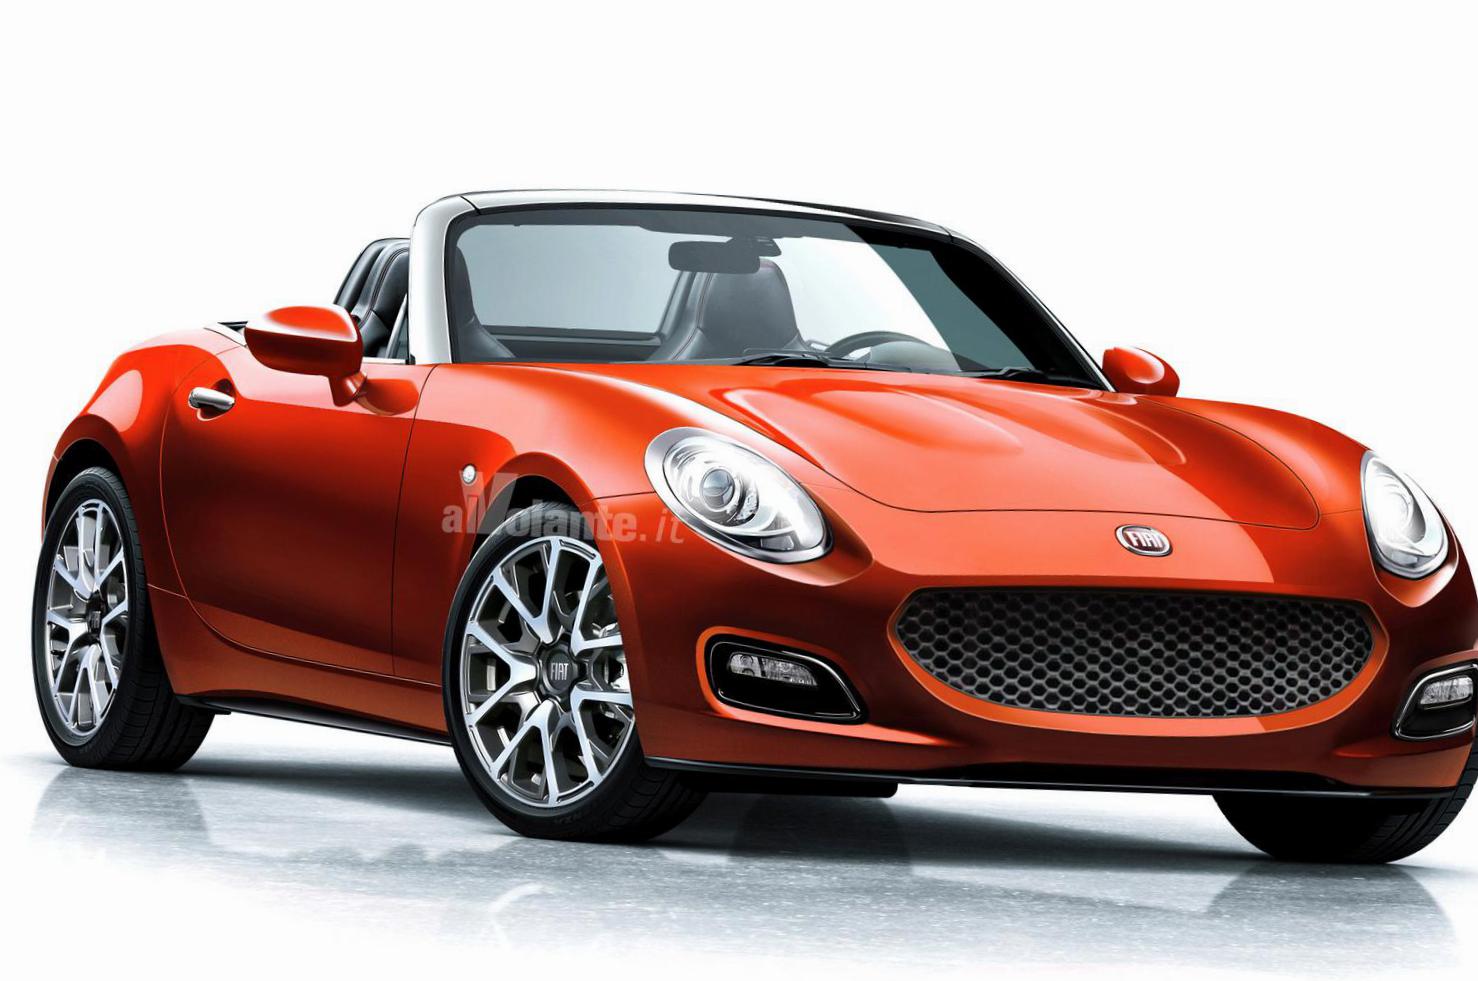 124 Spider Fiat Specifications cabriolet